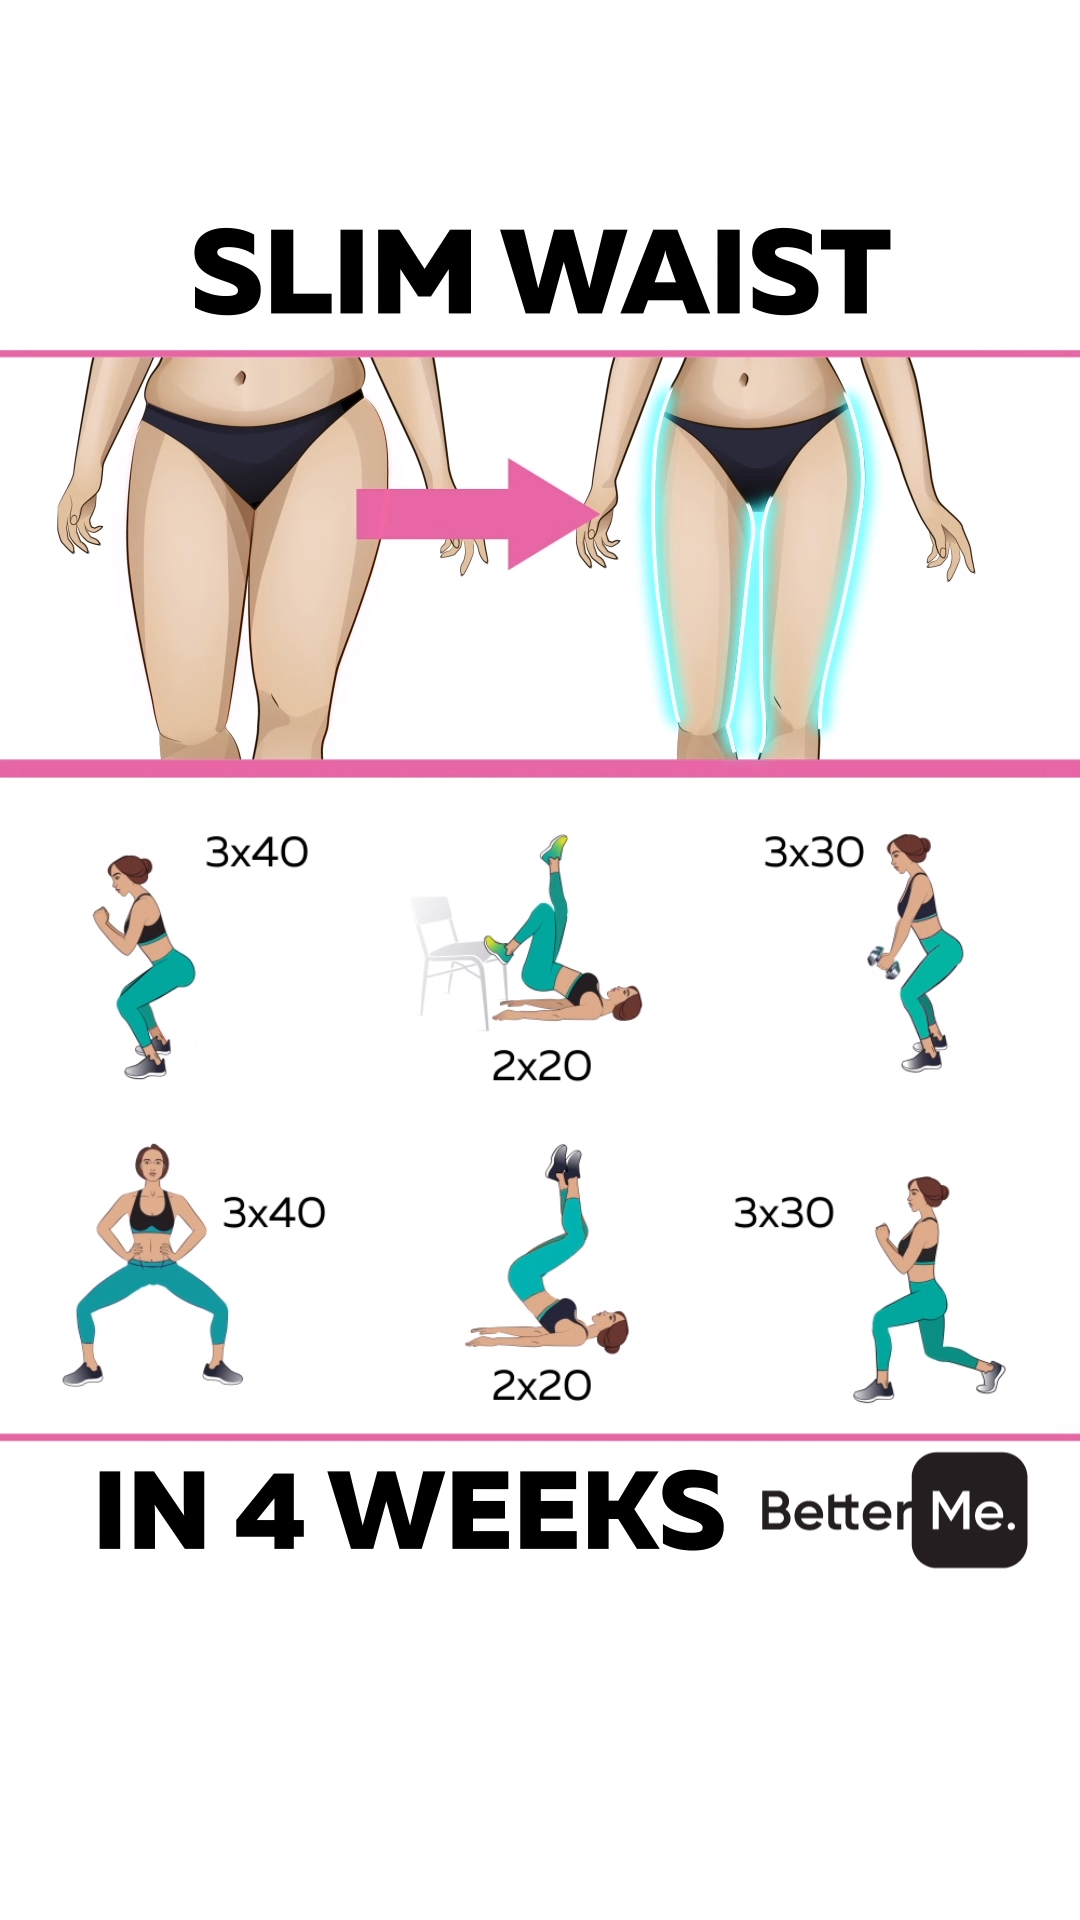 28-Day Challenge Rules to Get Slimmer Body at Home